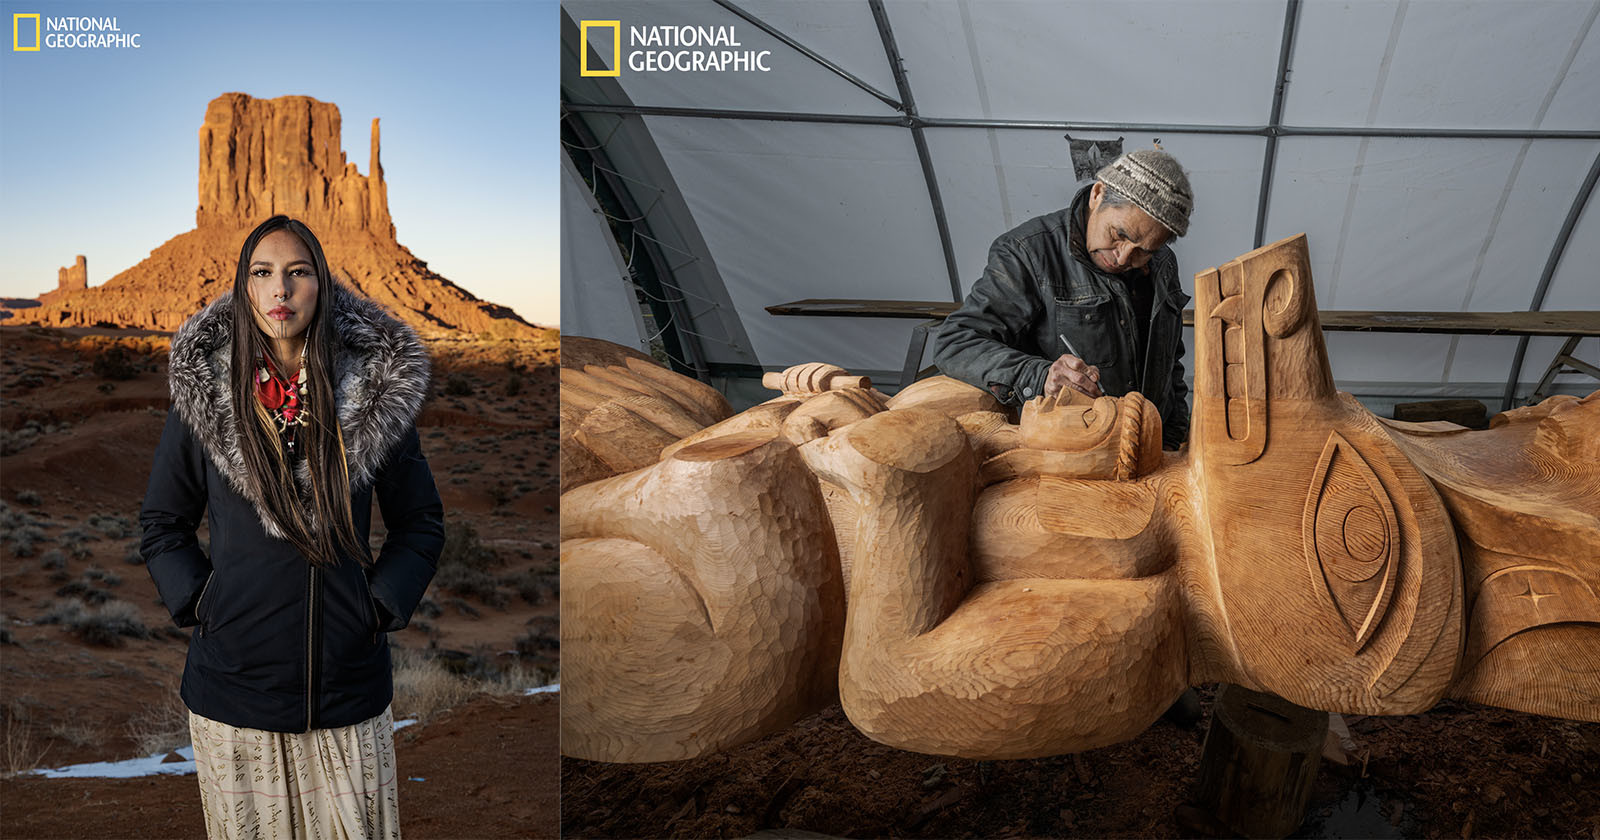 NatGeo Photo Series Makes the Case for Native American Sovereignty